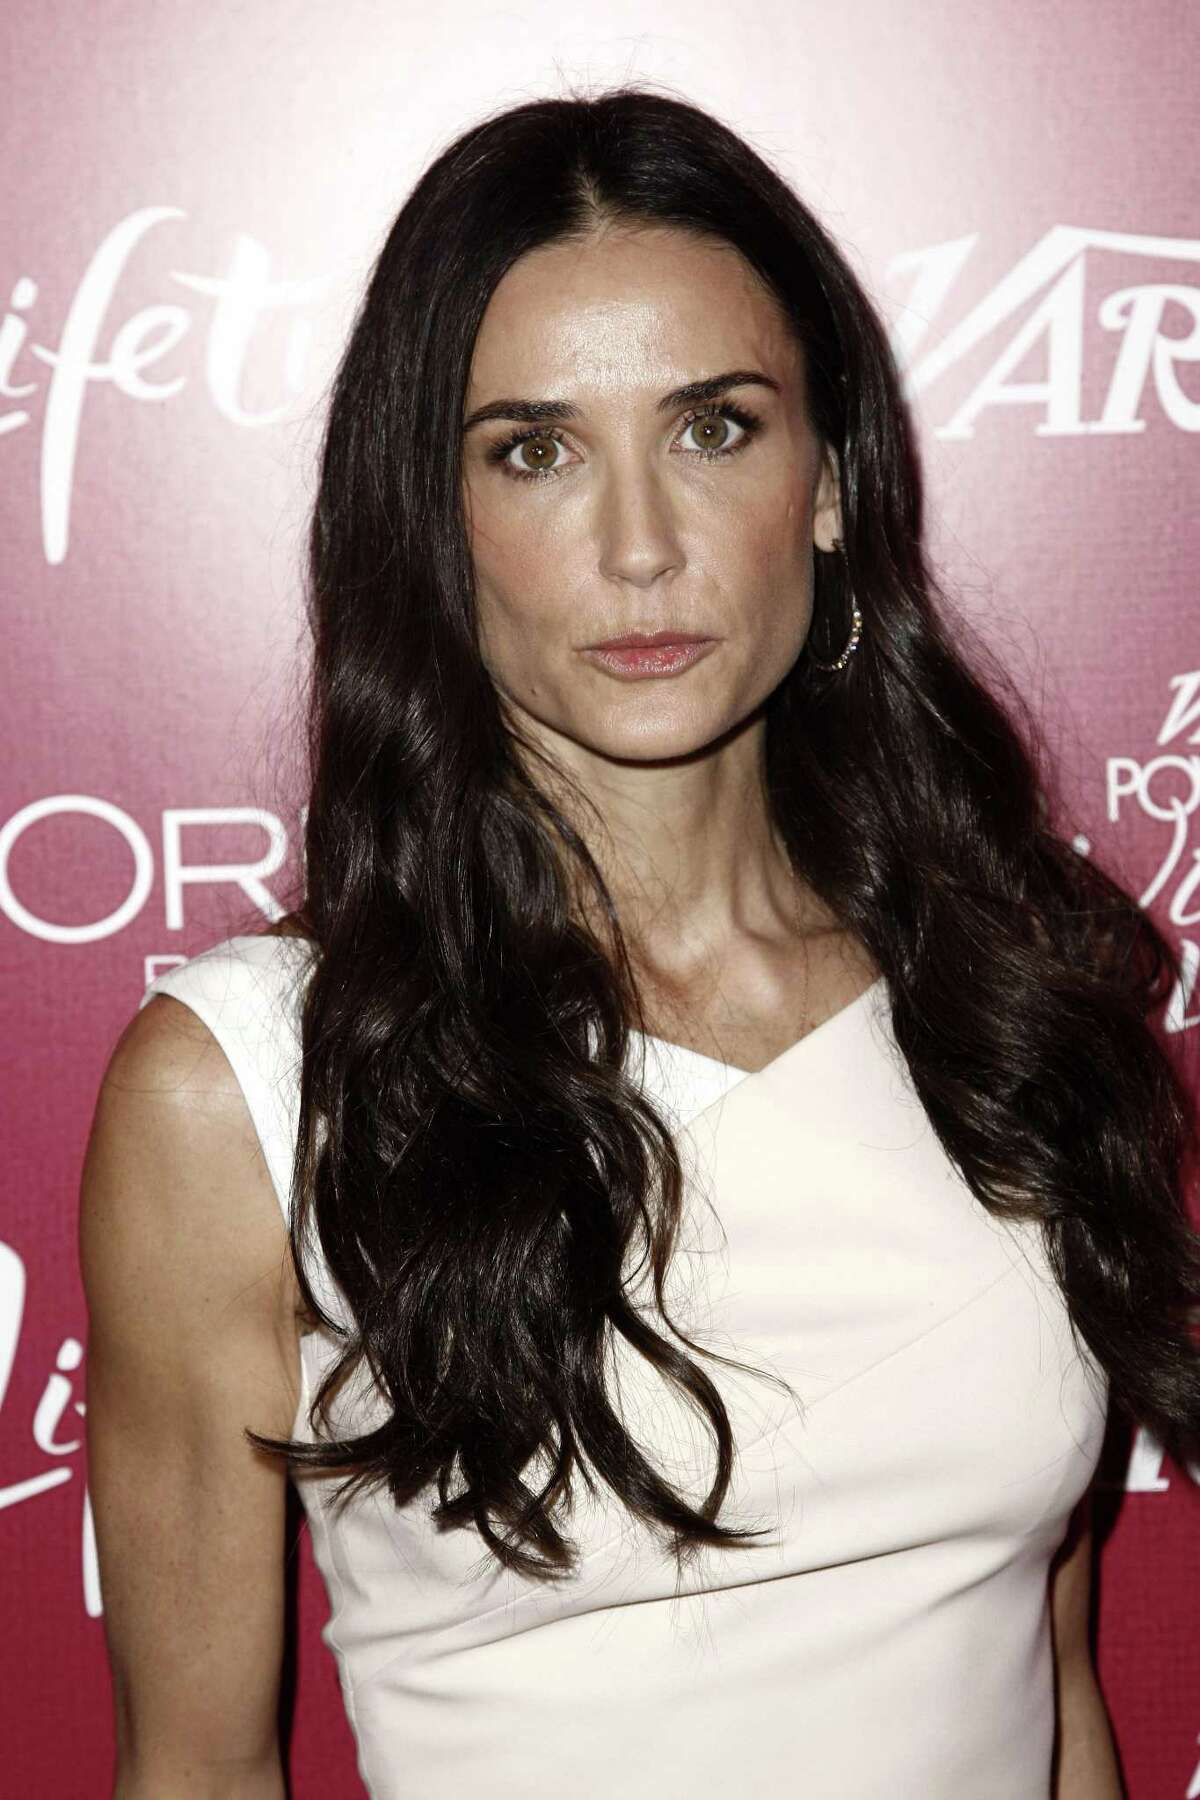 Demi Moore arrives at Variety's 3rd Annual Power of Women Luncheon in Beverly Hills, Calif., in this Sept. 23, 2011 photo. A 911 recording released Friday Jan. 27, 2012 by Los Angeles fire officials revealed frantic efforts by friends of Demi Moore to get help for the actress who was convulsing as they gathered around her and tried to comfort her. Moore was "semi-conscious, barely," according to a female caller on the recording. (AP Photo/Matt Sayles)